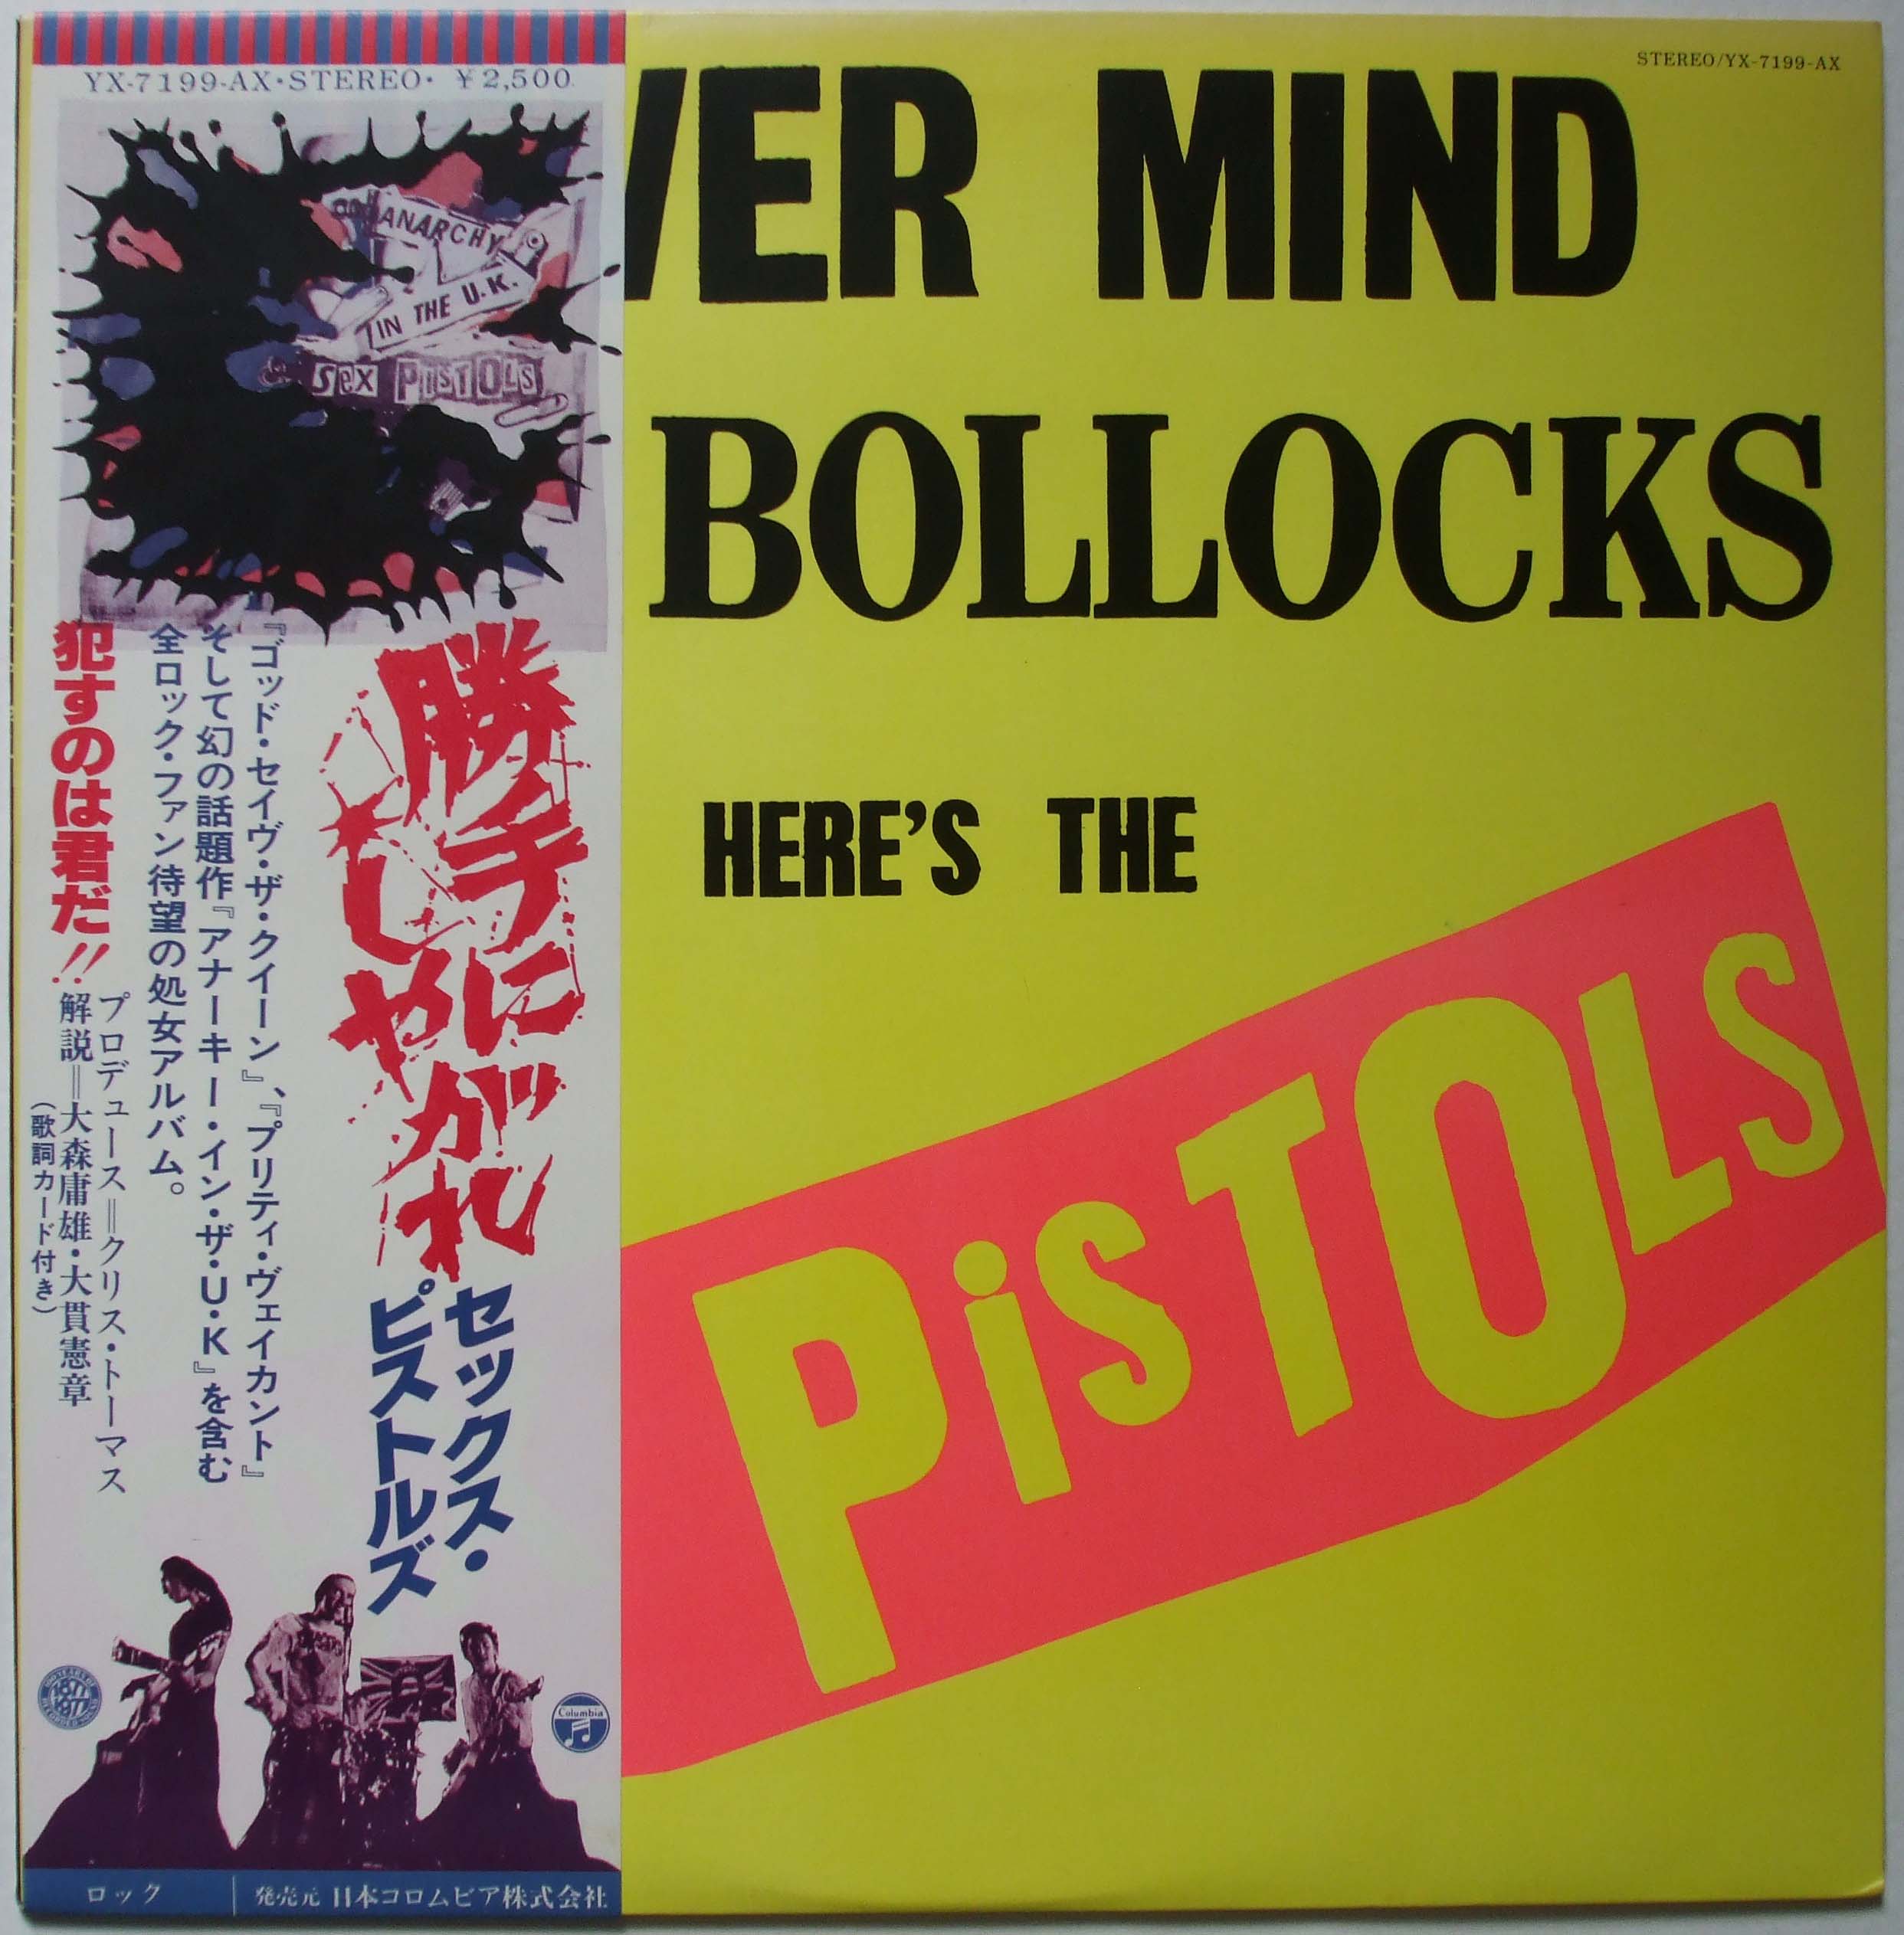 Never Mind the Bollocks, Here's the Sex Pistols (1977) - Sex 